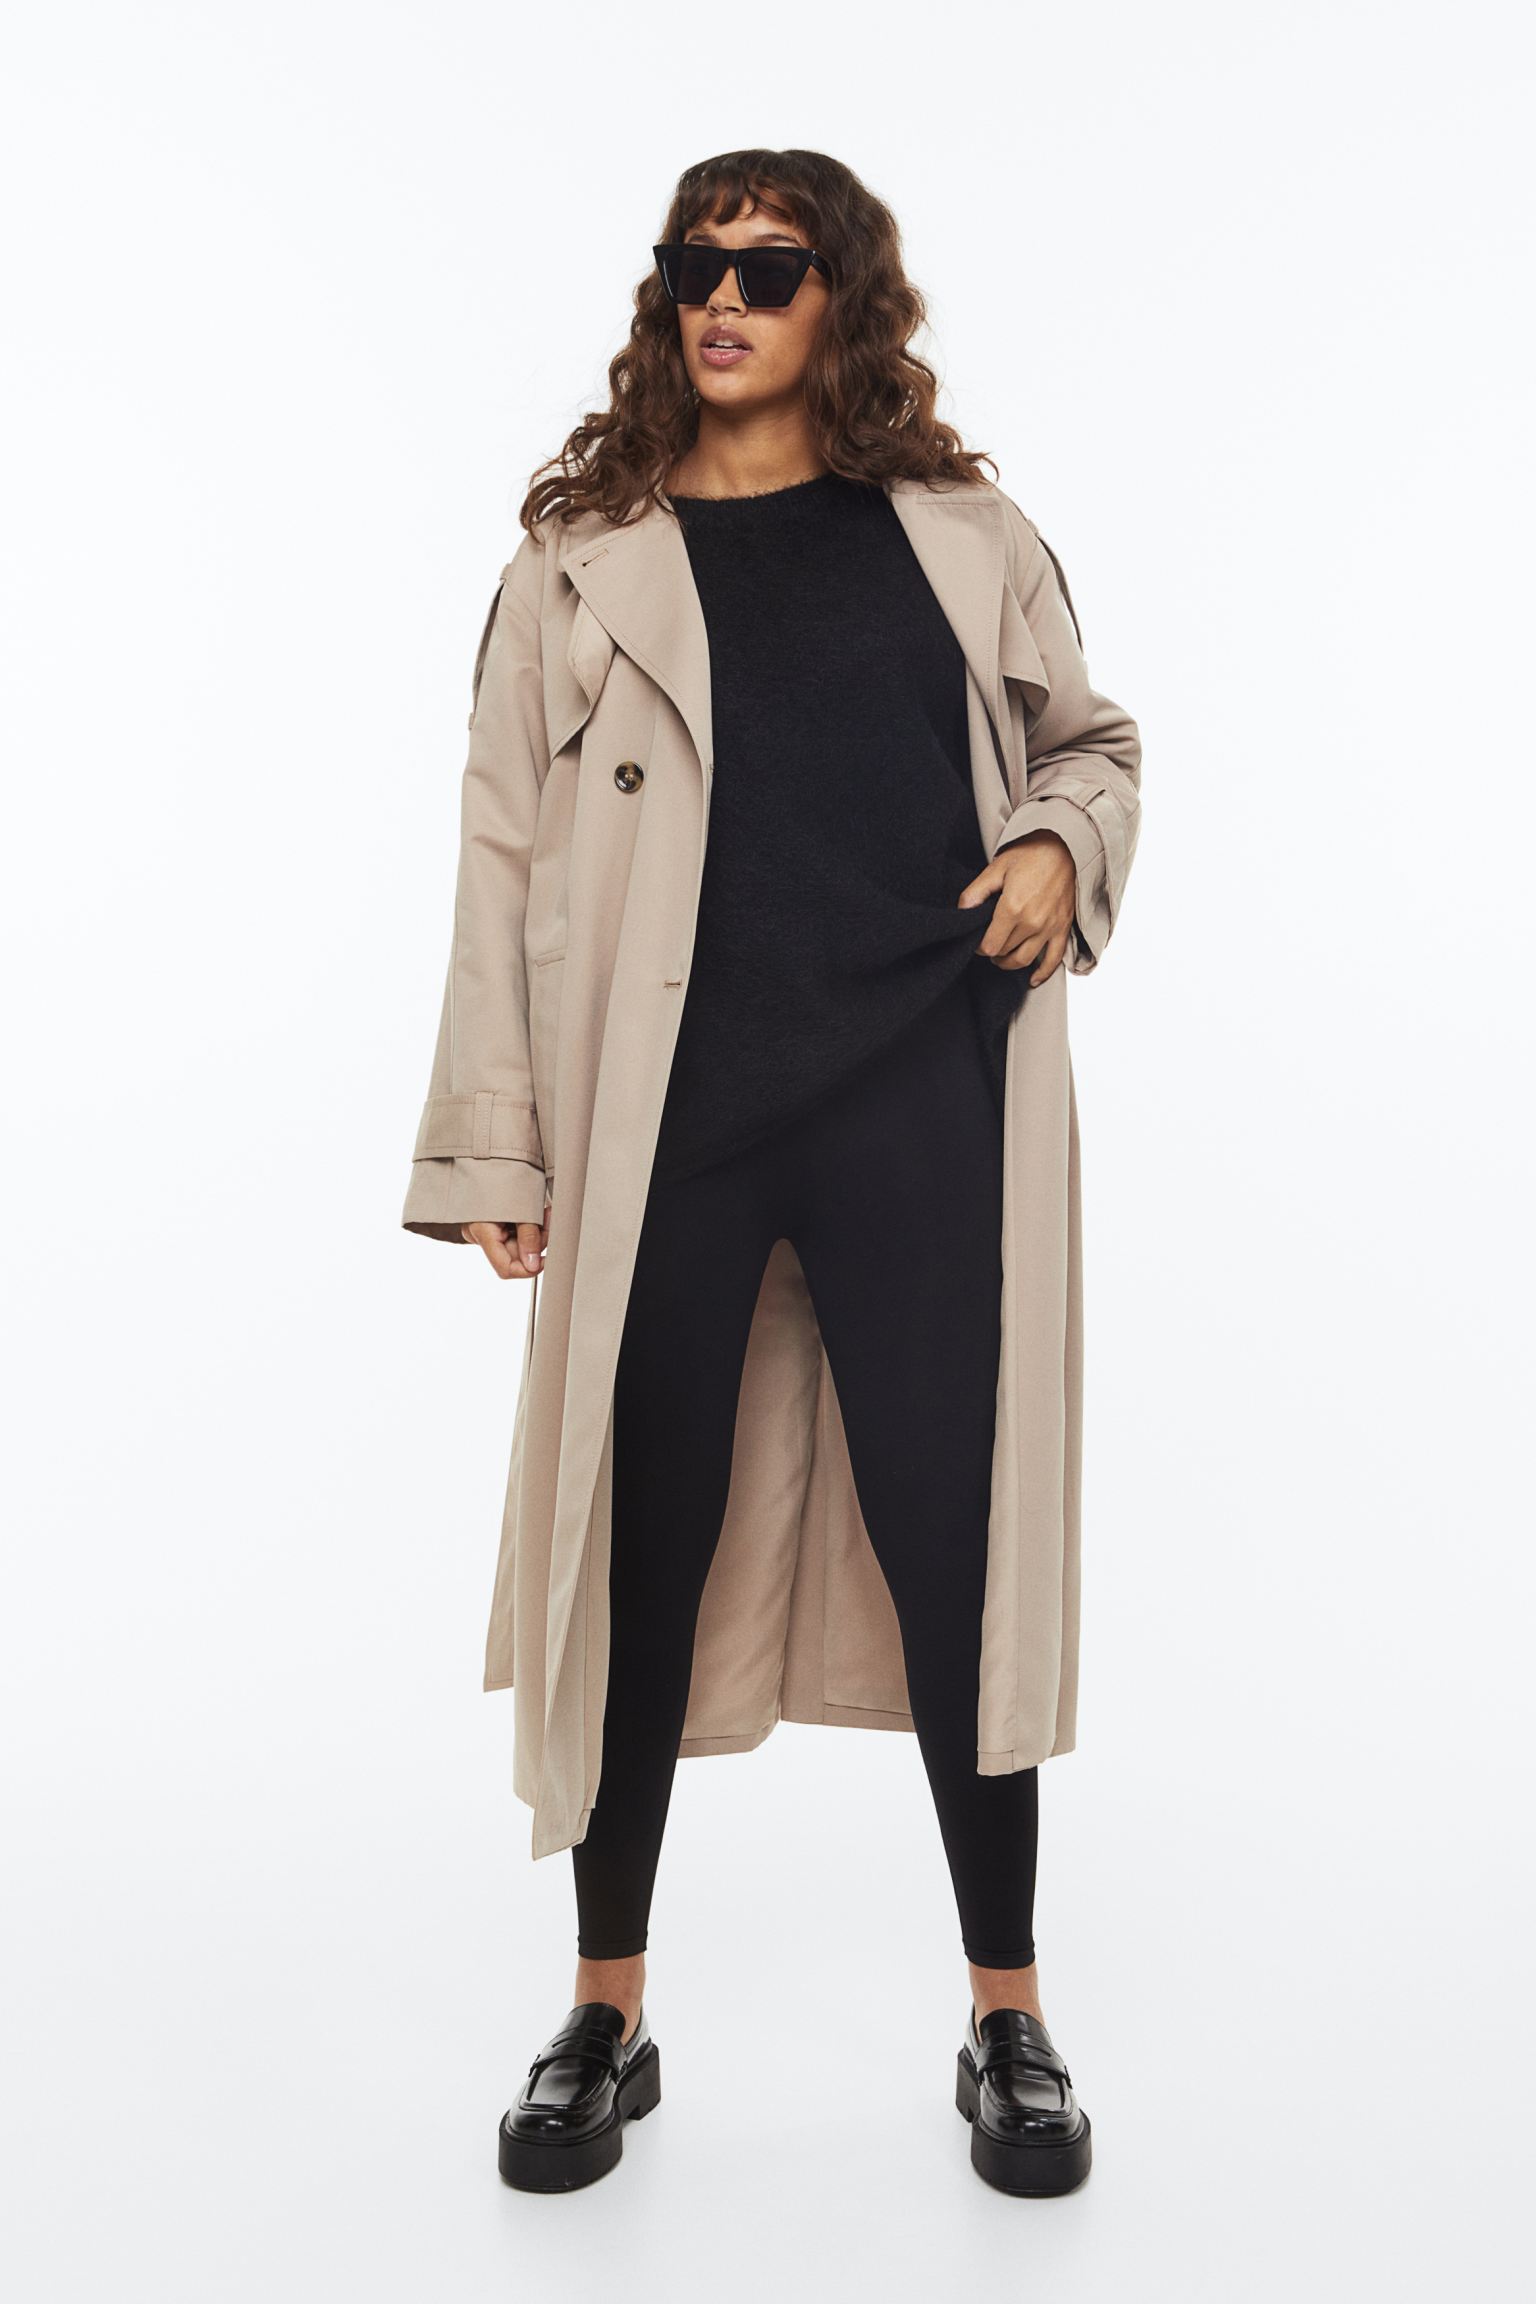 Model wearing black leggings, oversized shirt and a trench coat from H&M